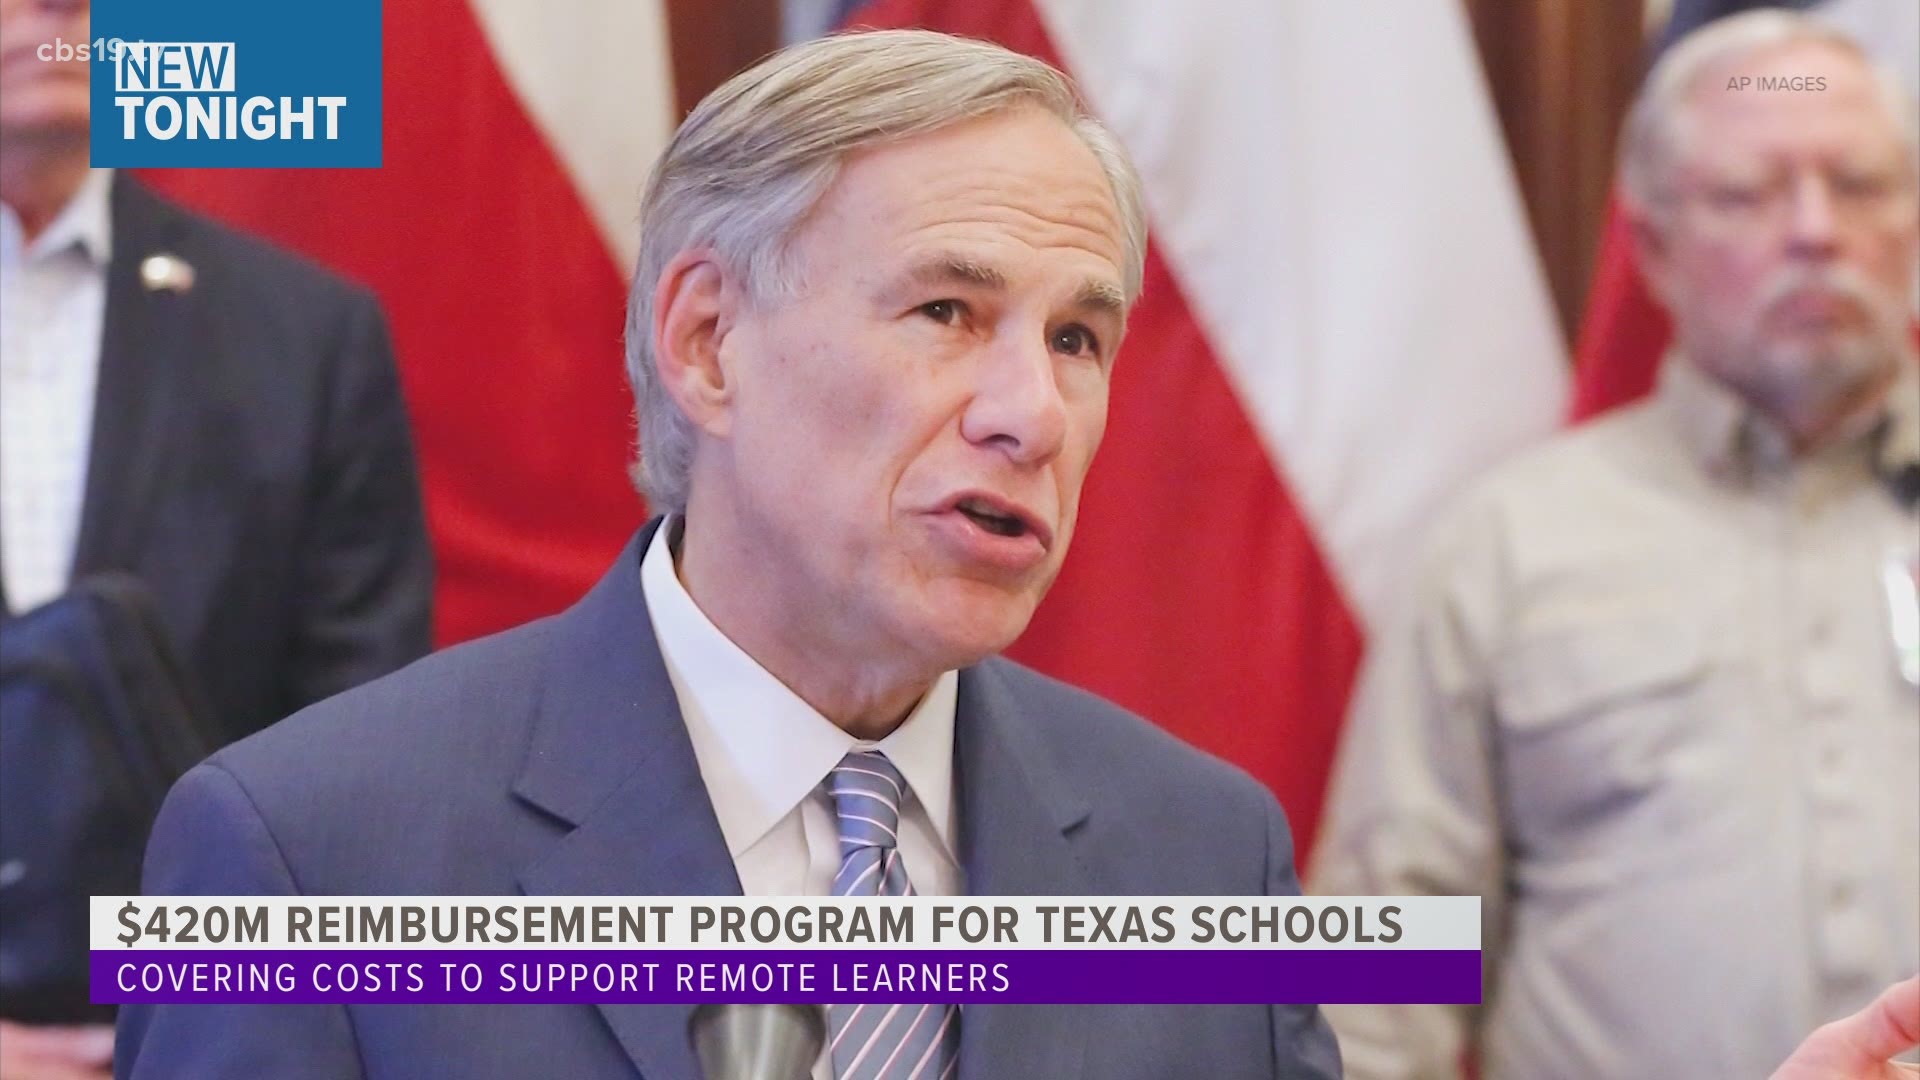 The program will cover costs incurred by Texas public schools that purchased Wi-Fi hotspots and/or eLearning devices (such as laptops, tablets and Chromebooks).